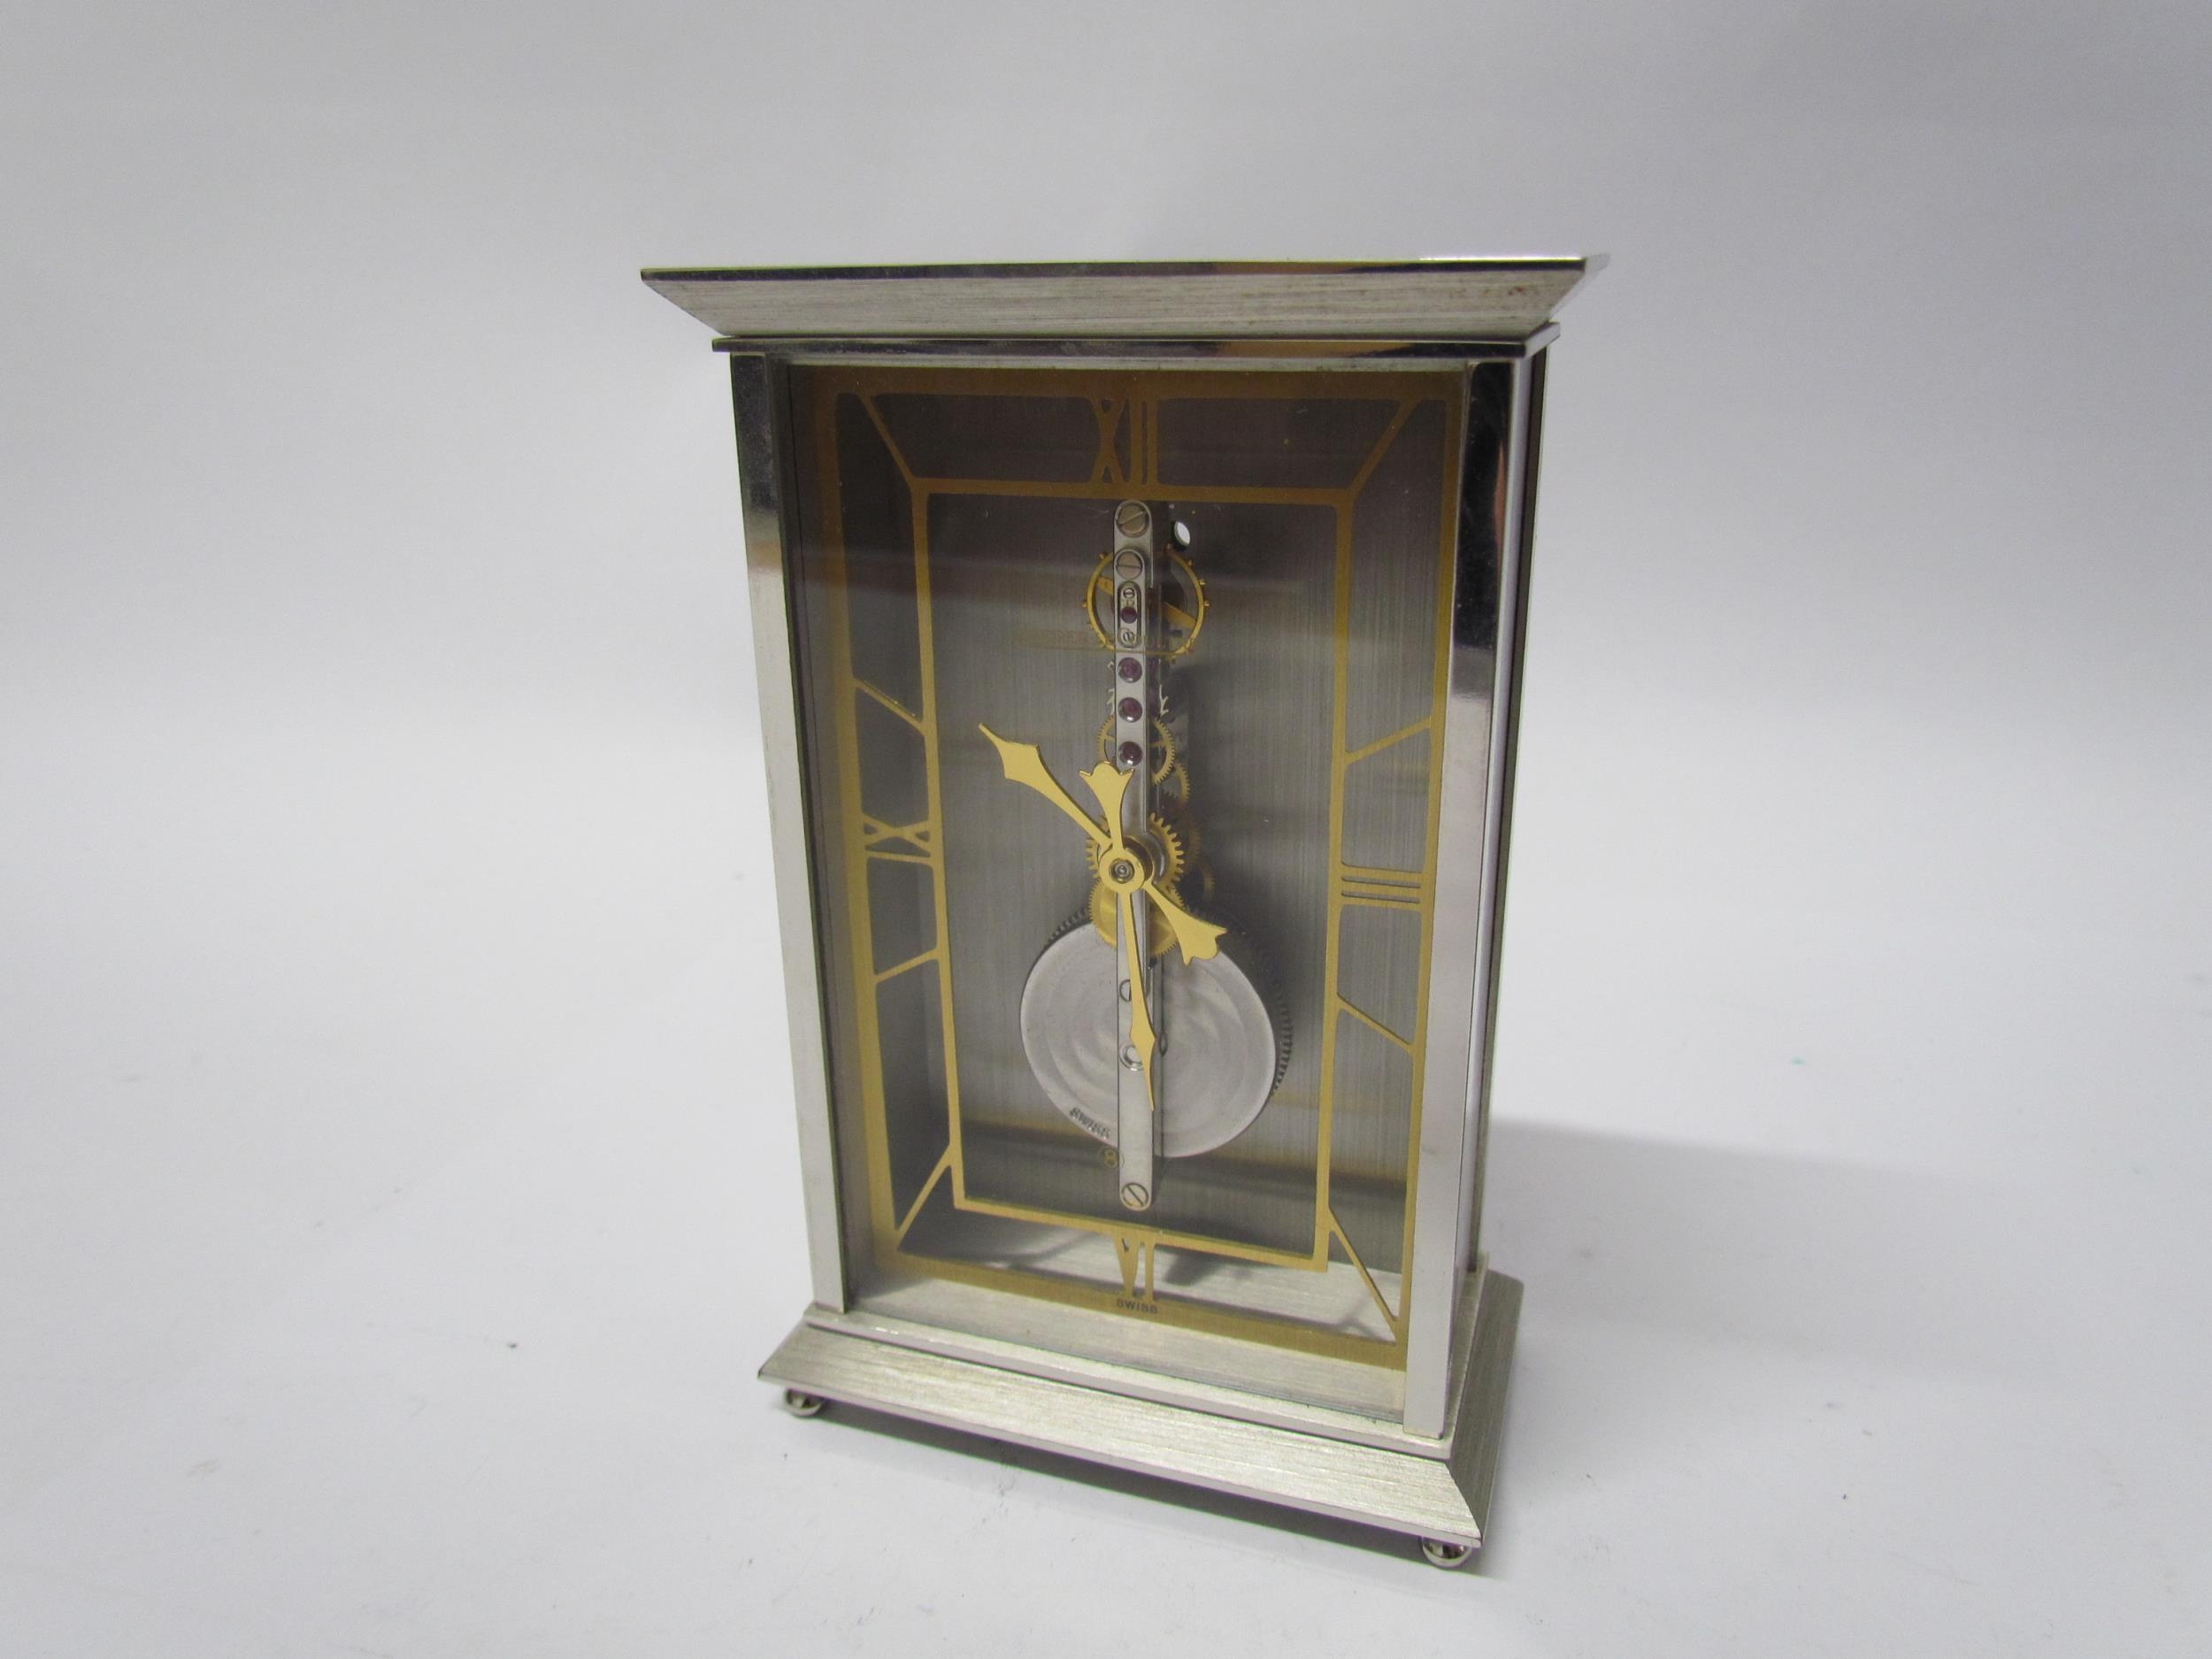 A Jaeger Le Coultre No. 481 mantel clock, visible skeleton movement set with rubies, stainless steel - Image 2 of 5